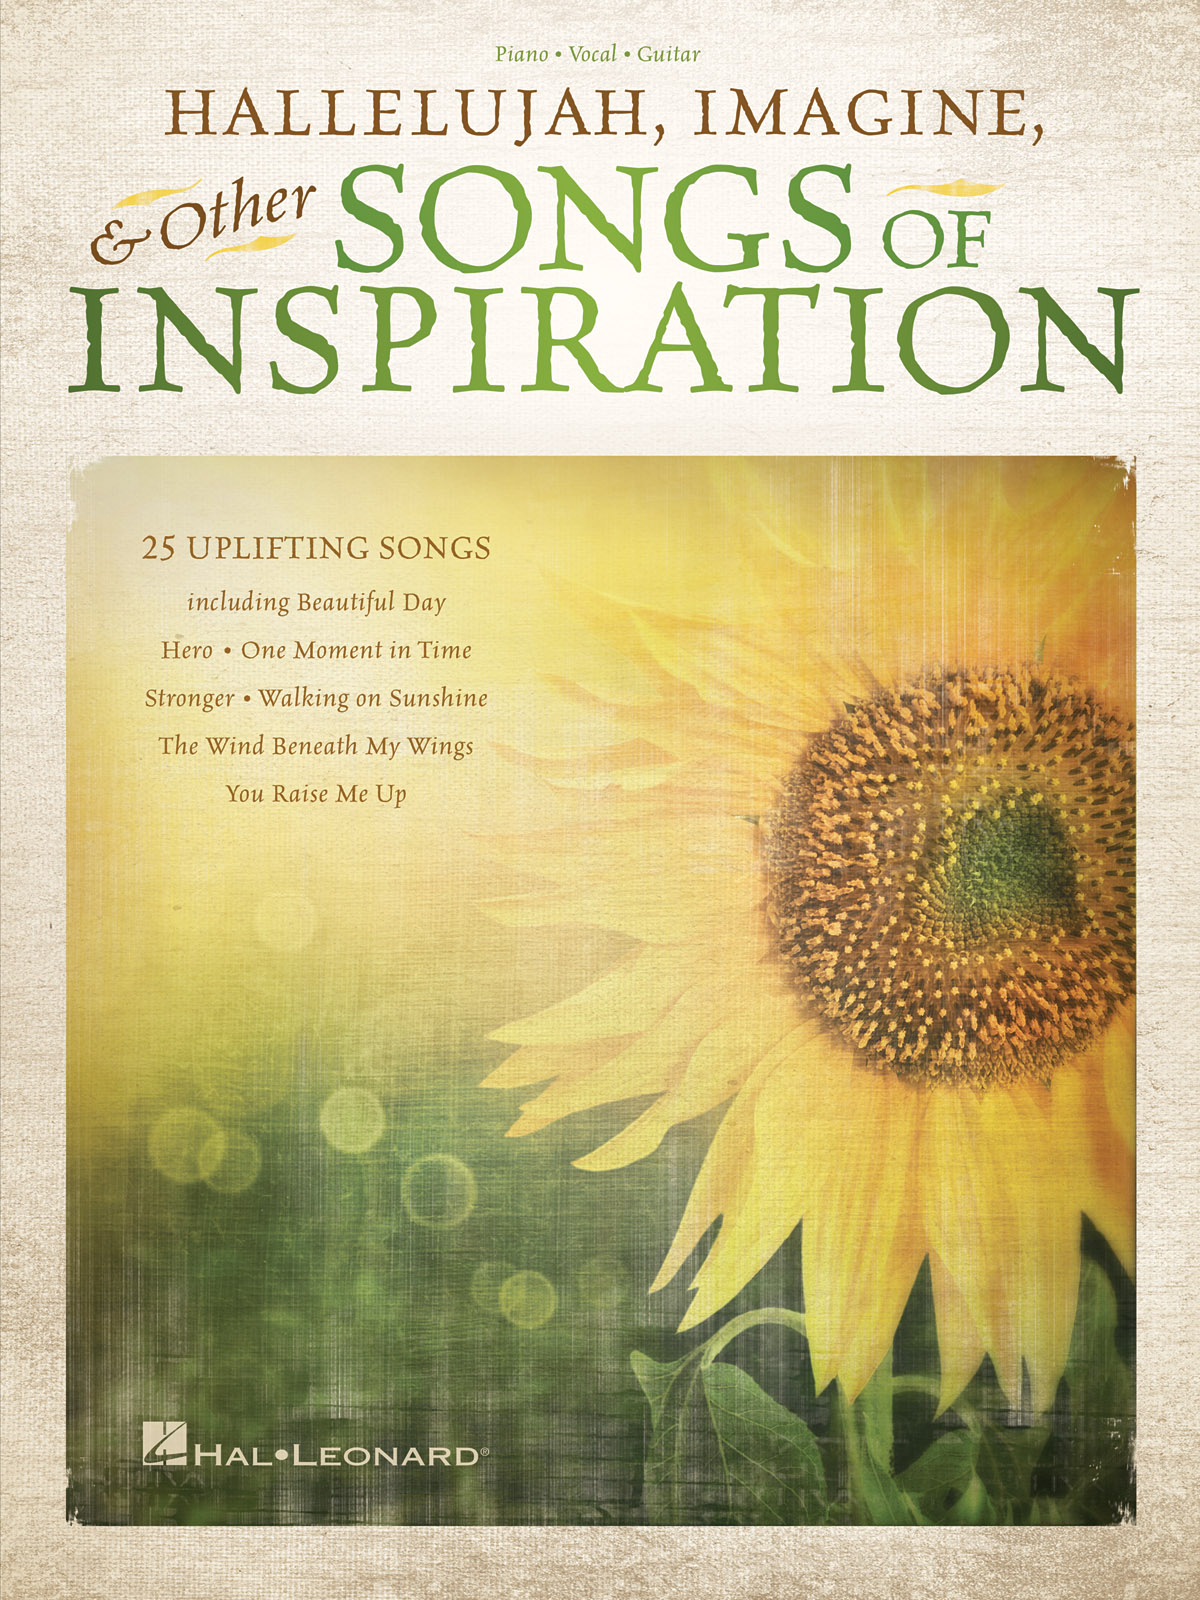 Hallelujah and Other Songs of Inspiration